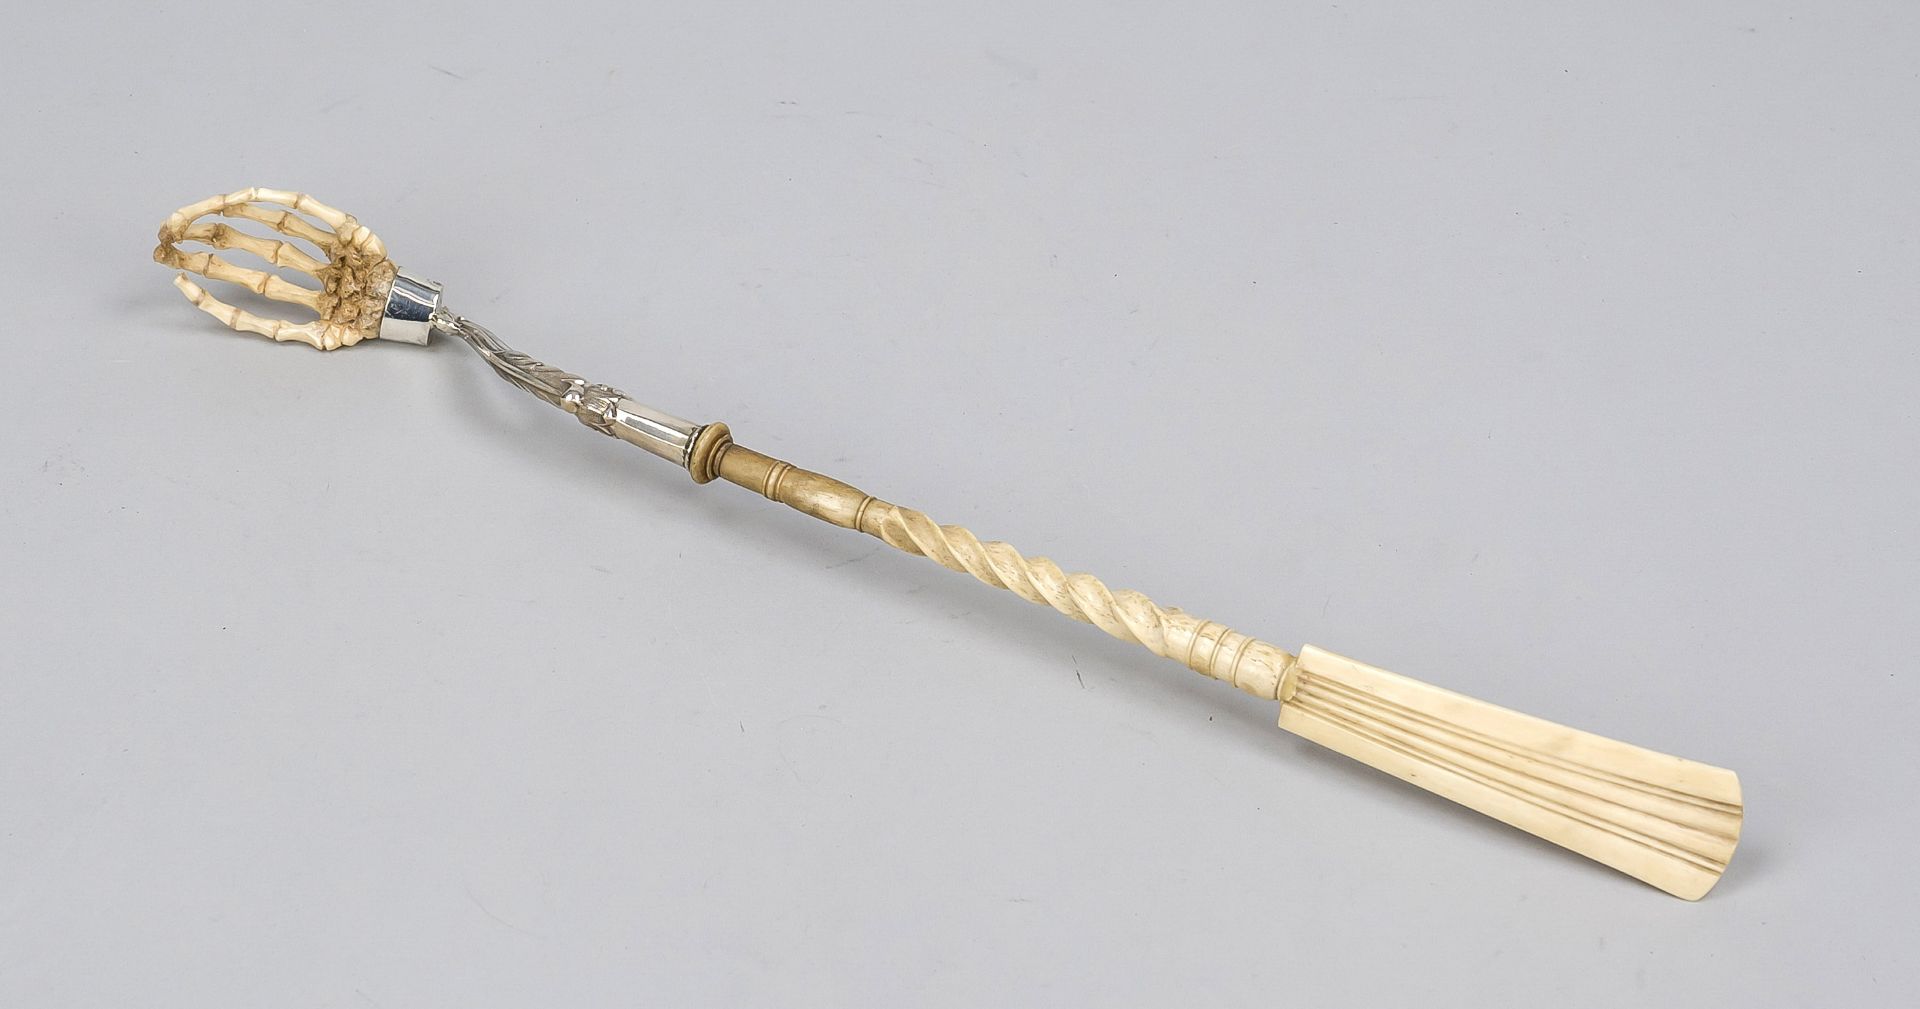 Scratcher (mariage), probably early 19th century. Turned and cut/carved bone shaft with ornamented